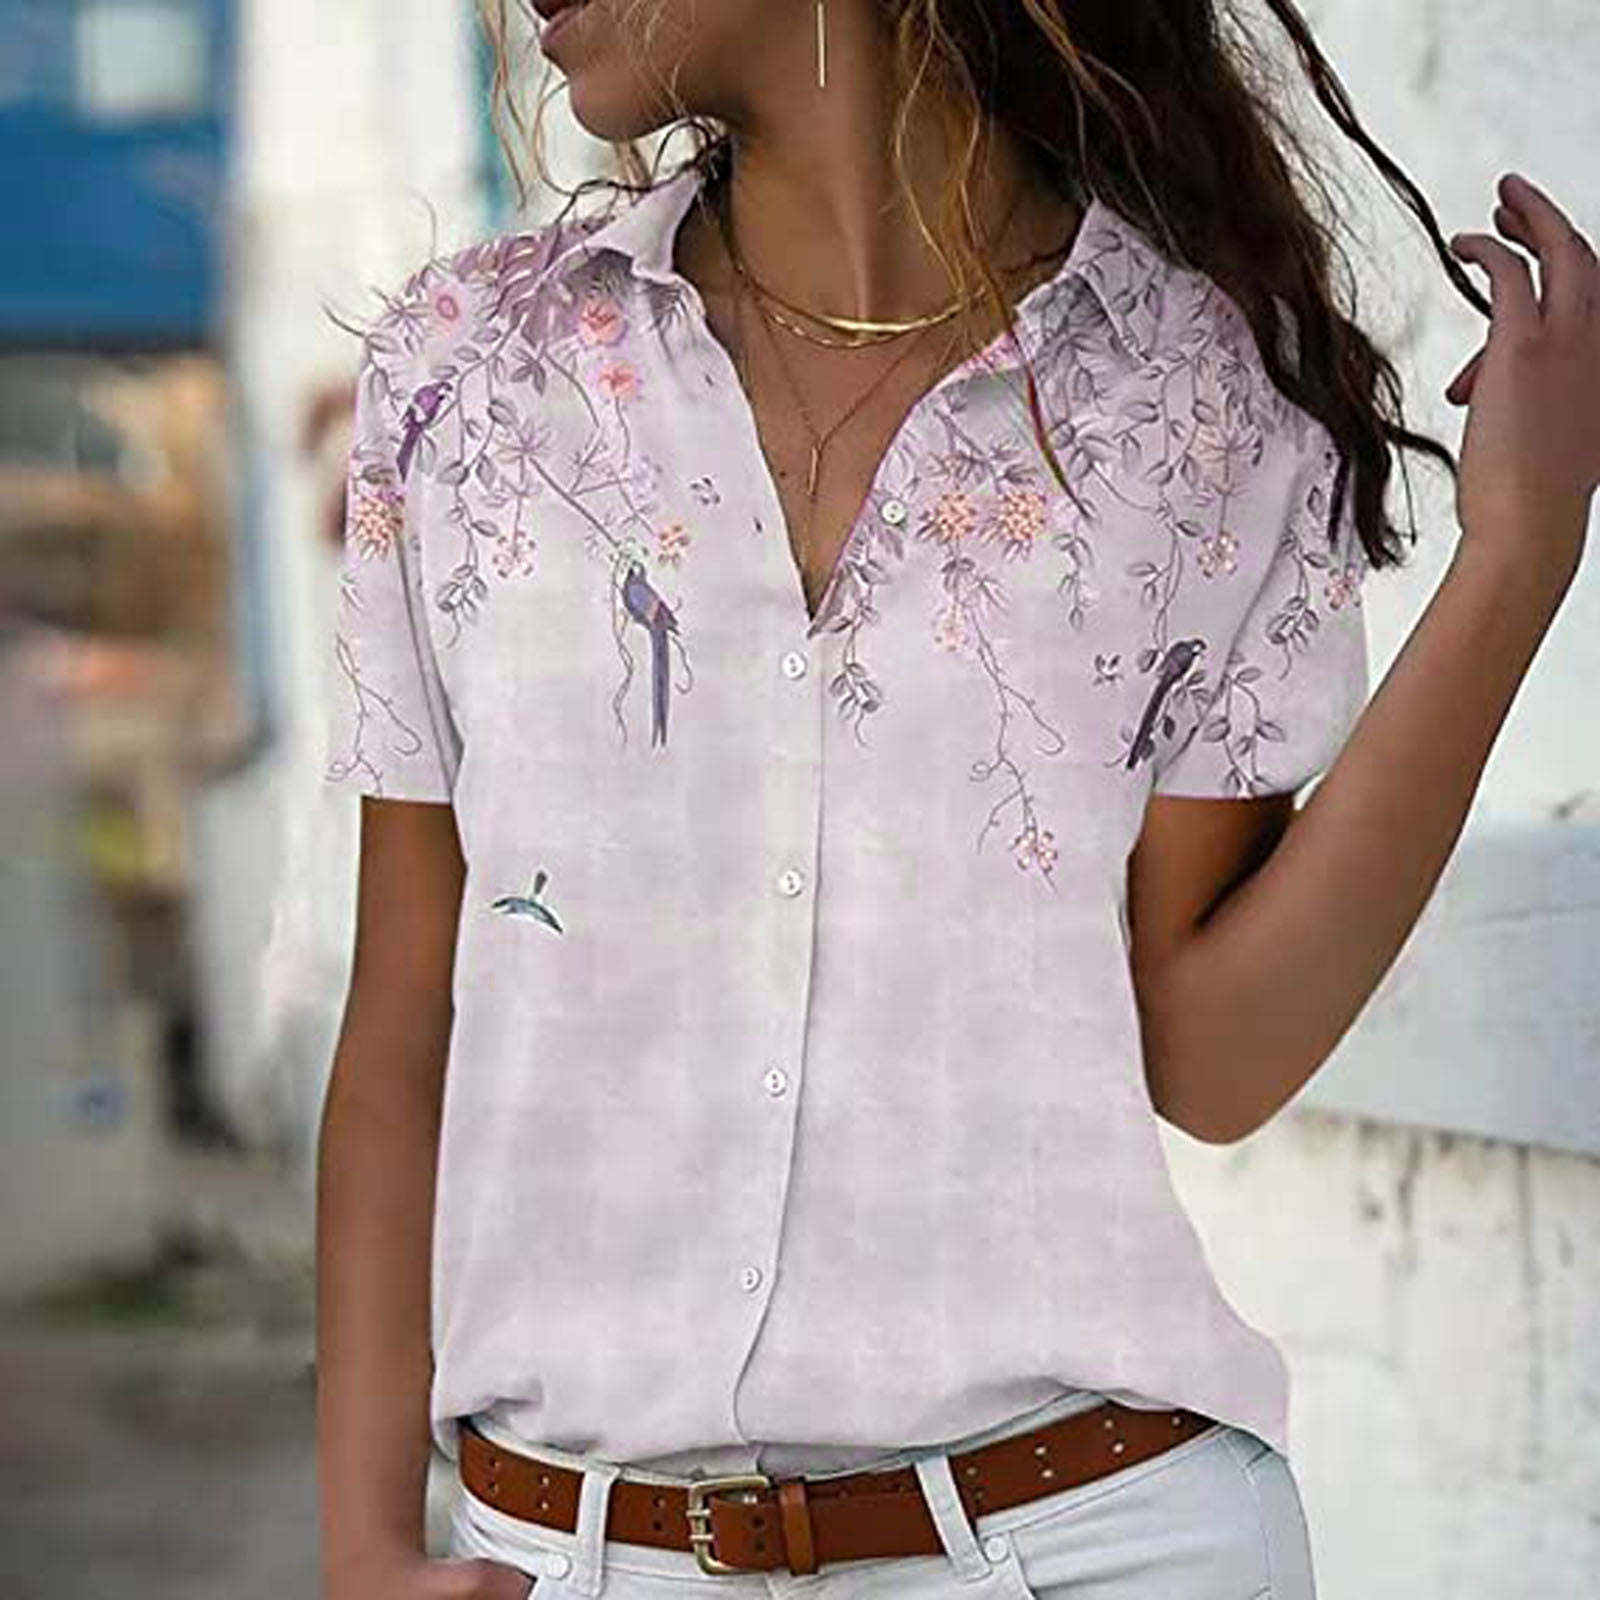 Hollister Lace Button-down Top in Pink Floral Womens Clothing Tops Short-sleeve tops Pink 